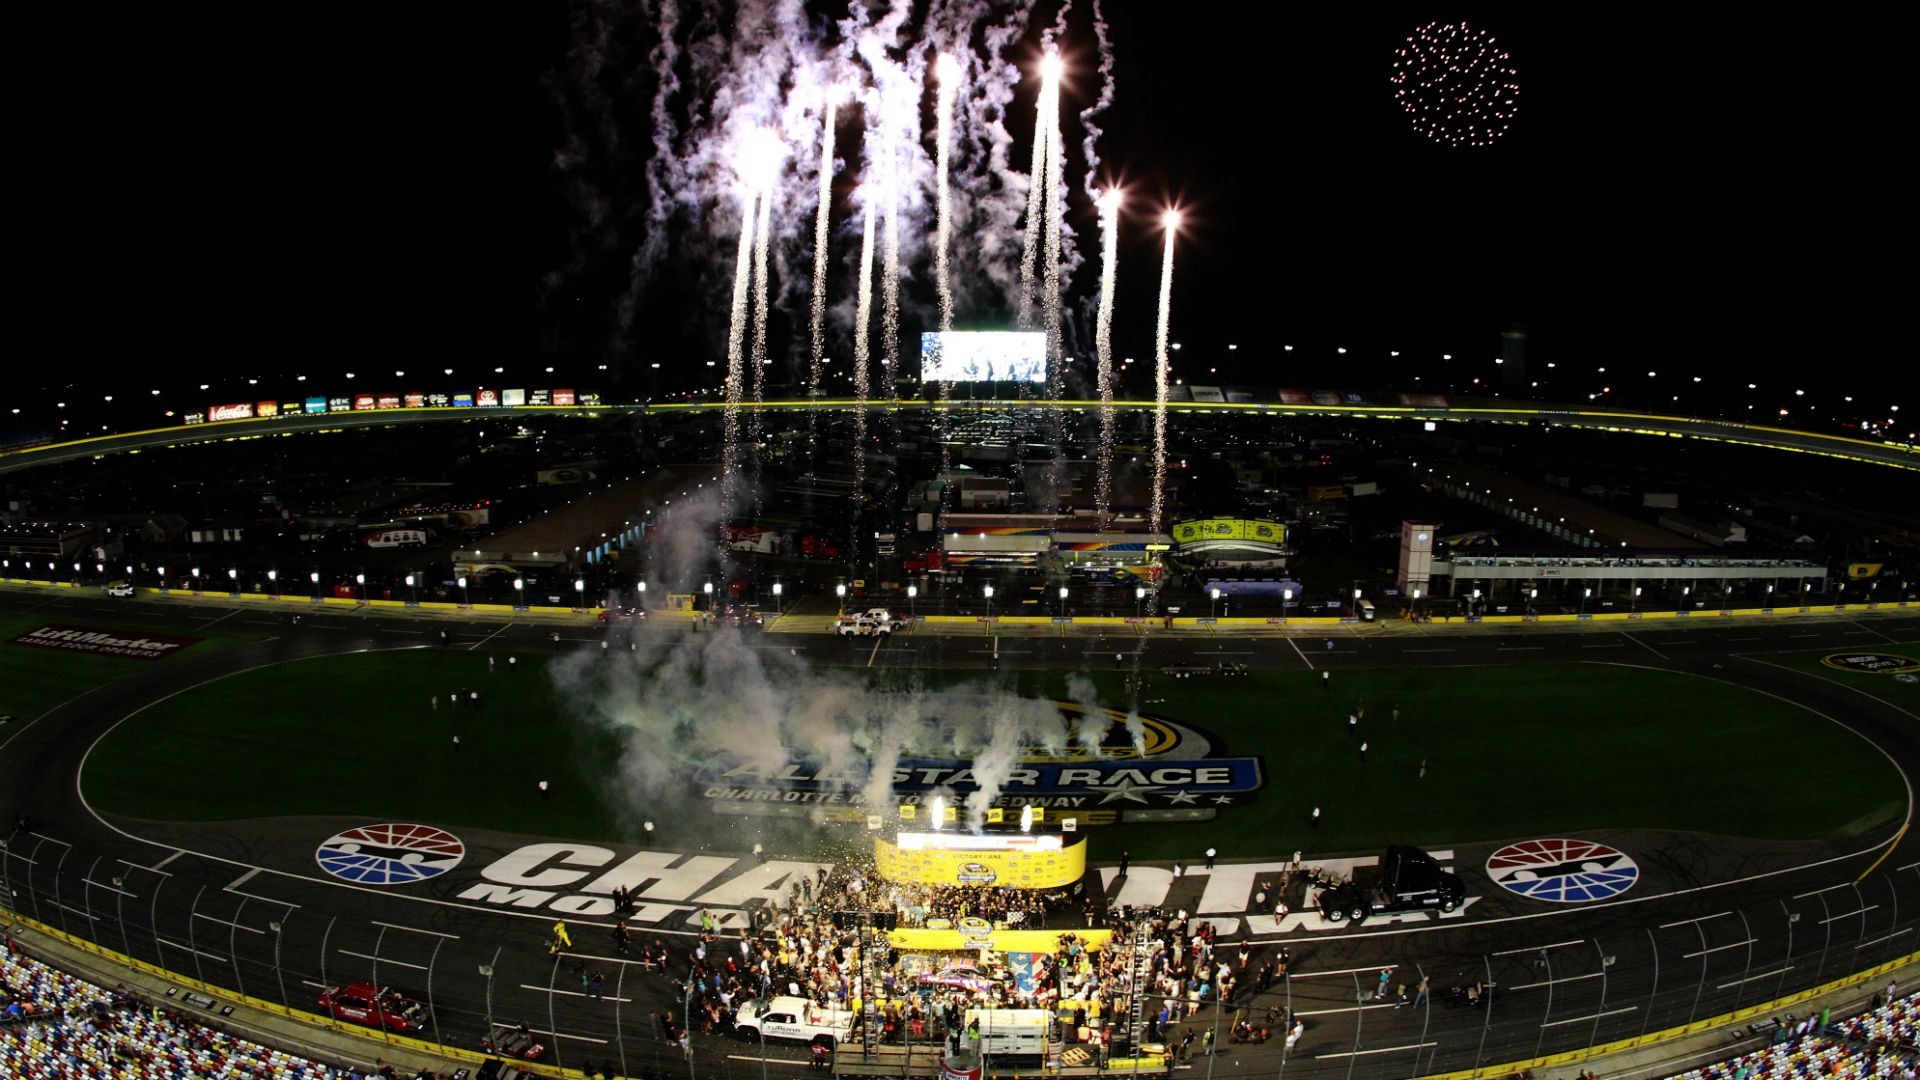 coca-cola 600 at charlotte motor speedway: schedule, time, tv info